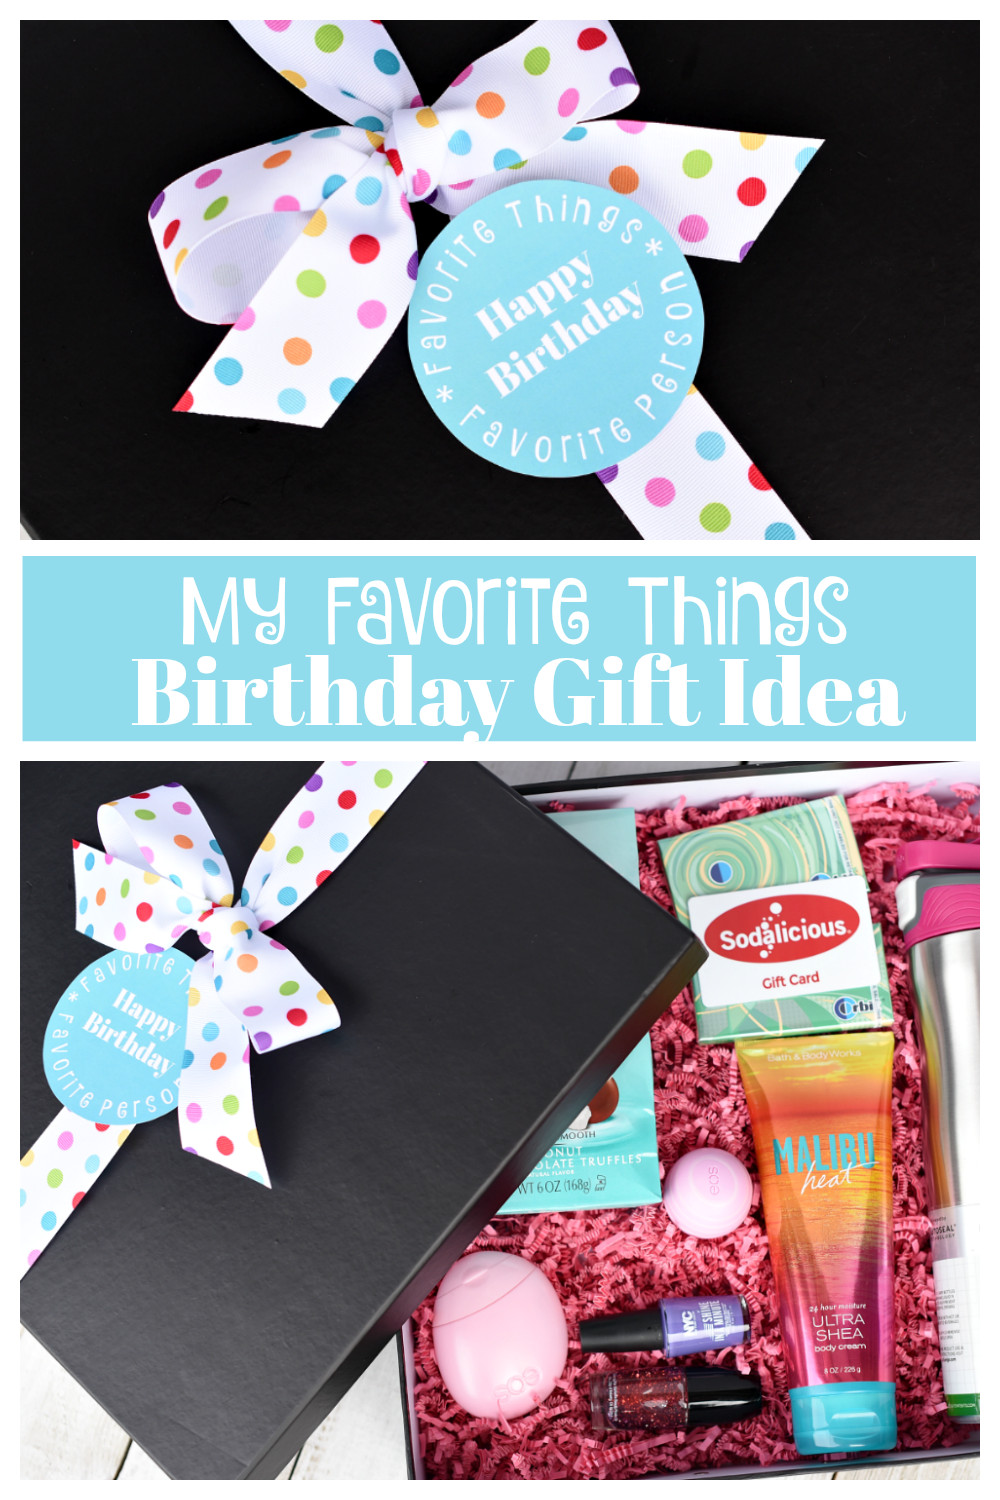 Gift Ideas For My Best Friend
 My Favorite Things Birthday Gifts for Your Best Friend